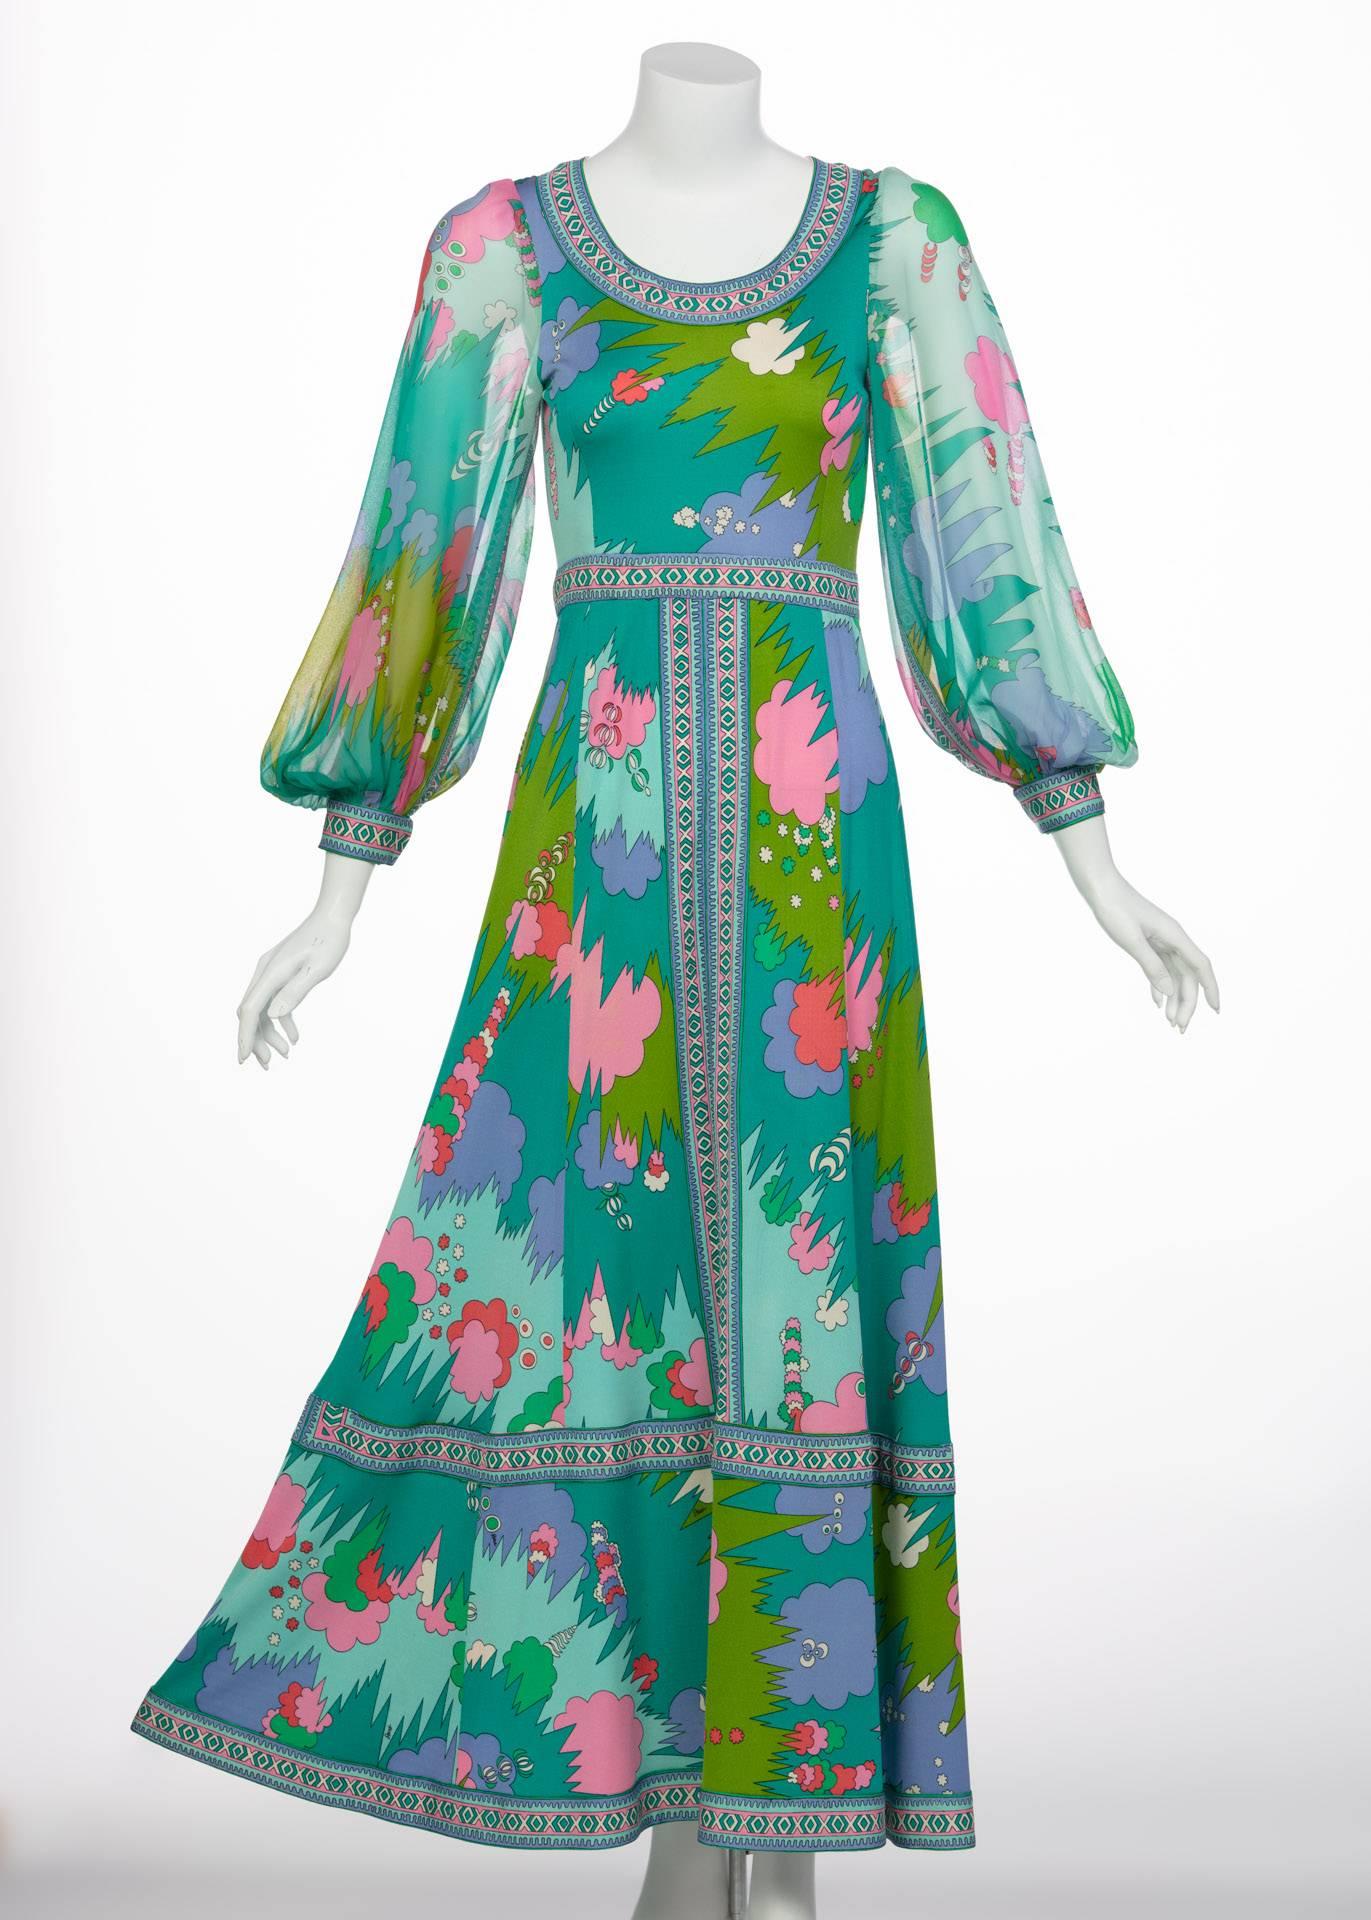 Bessi Multicolored Silk Jersey Chiffon Sleeves Maxi dress, 1970s  For Sale 6